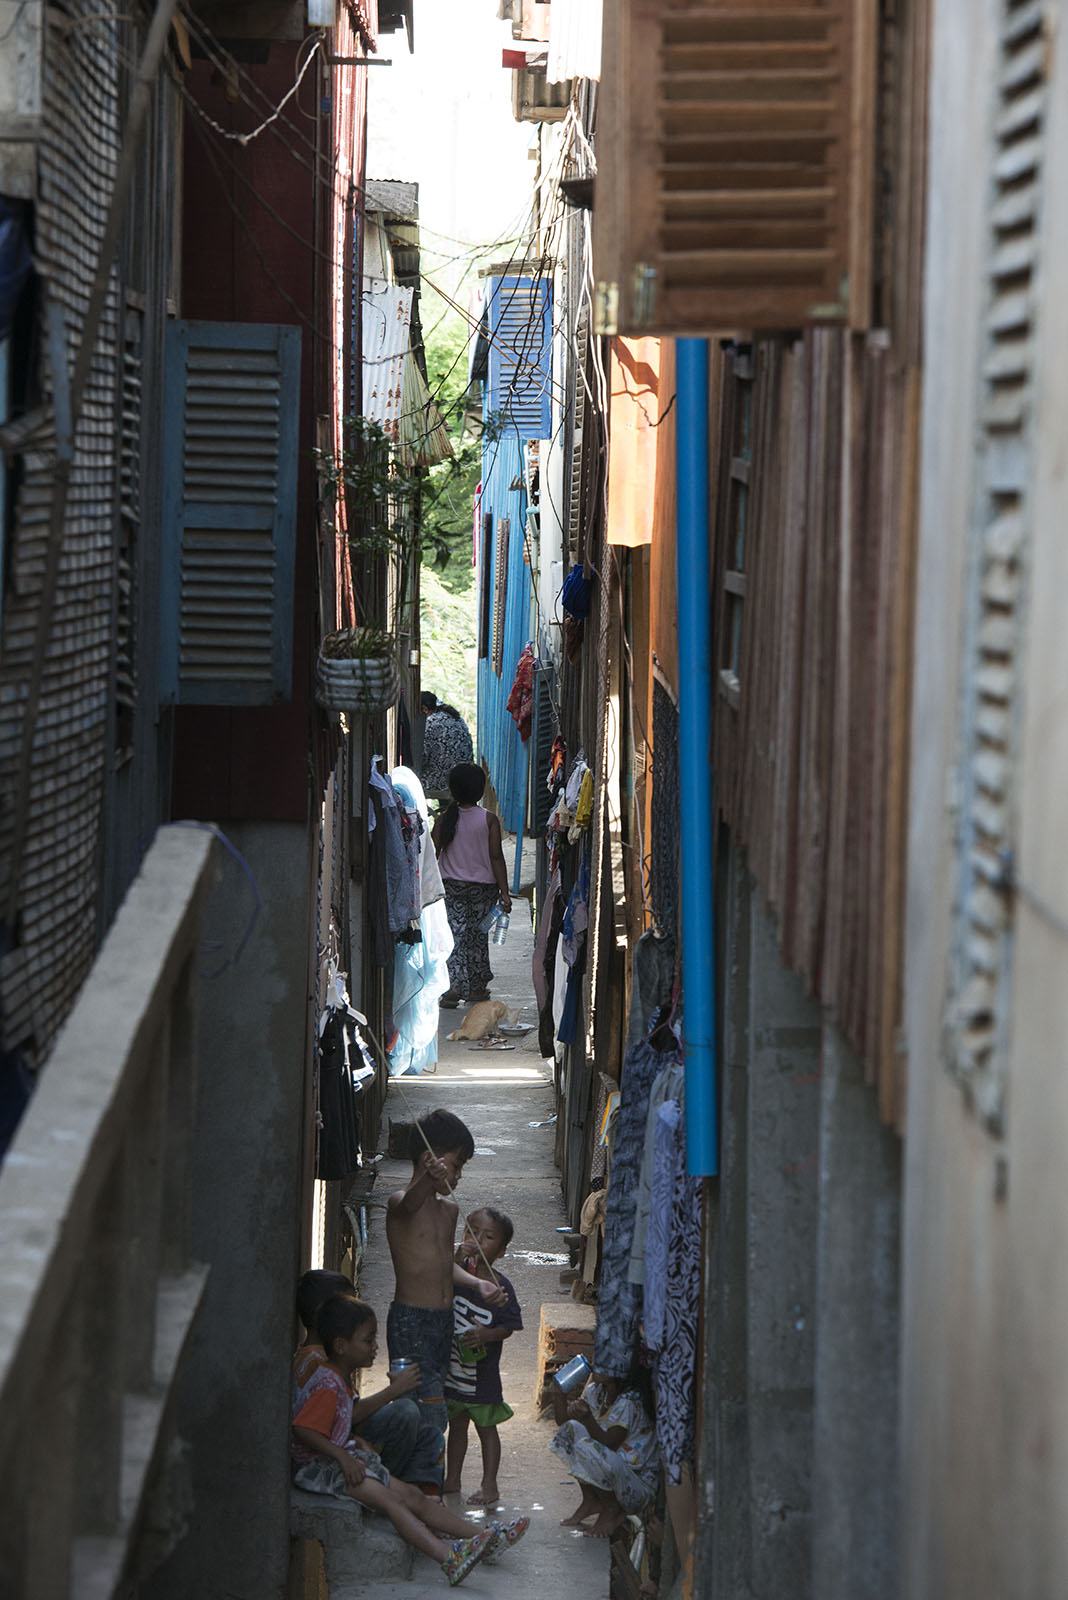 Children playing on the space between the houses, in a narrow alley in Phnom Penh, Cambodia